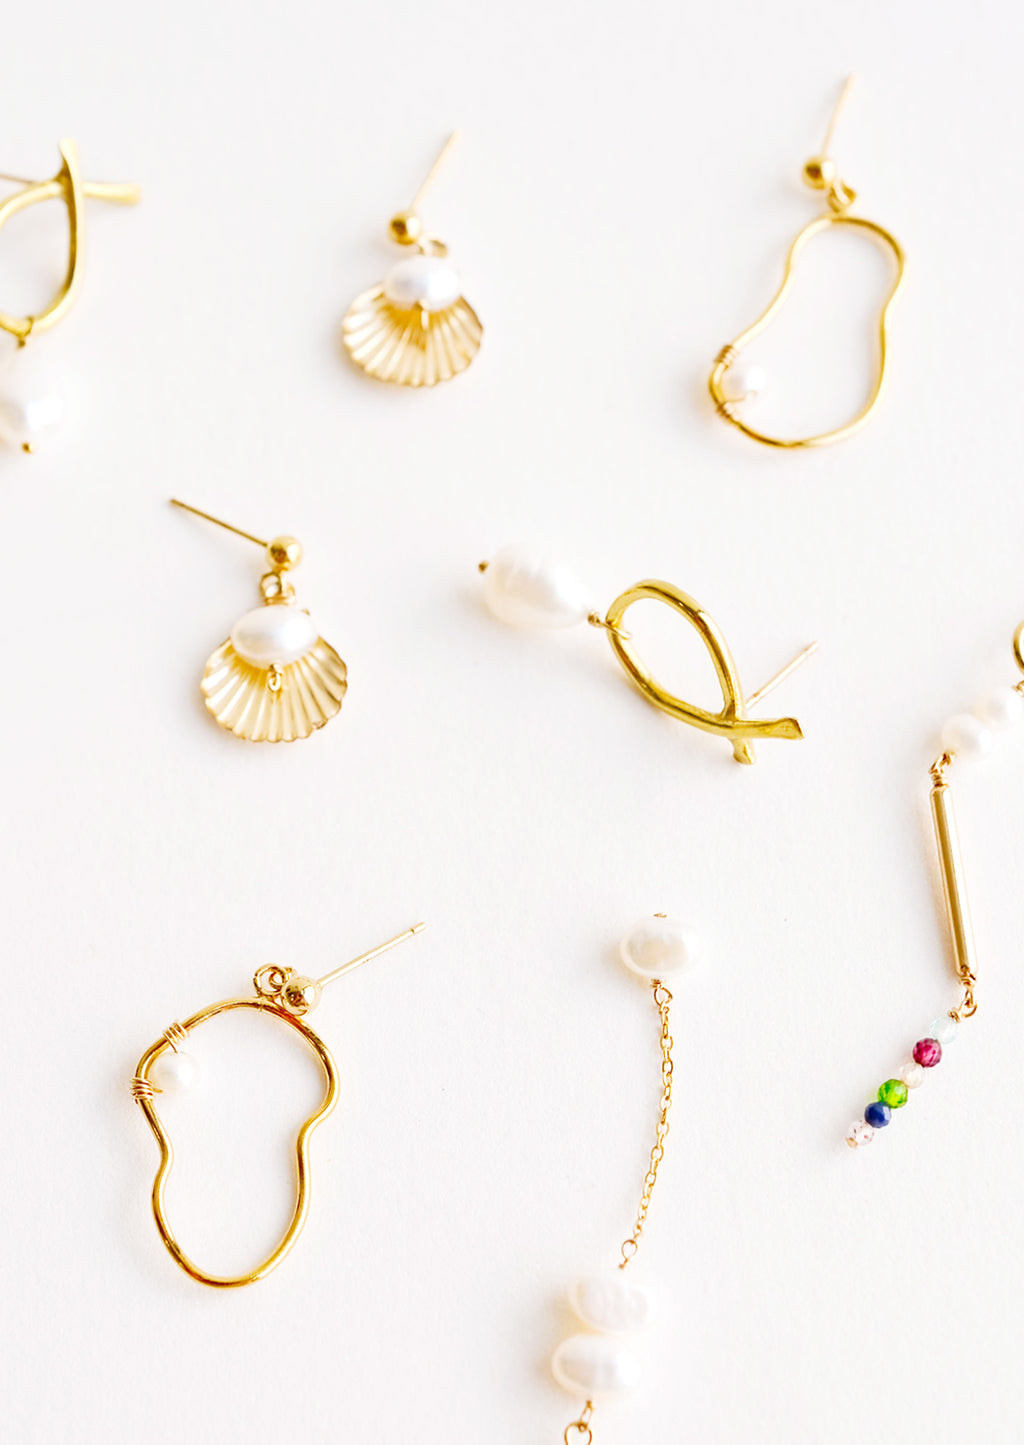 4: Product shot showing multiple styles and shapes of brass earrings with pearls.